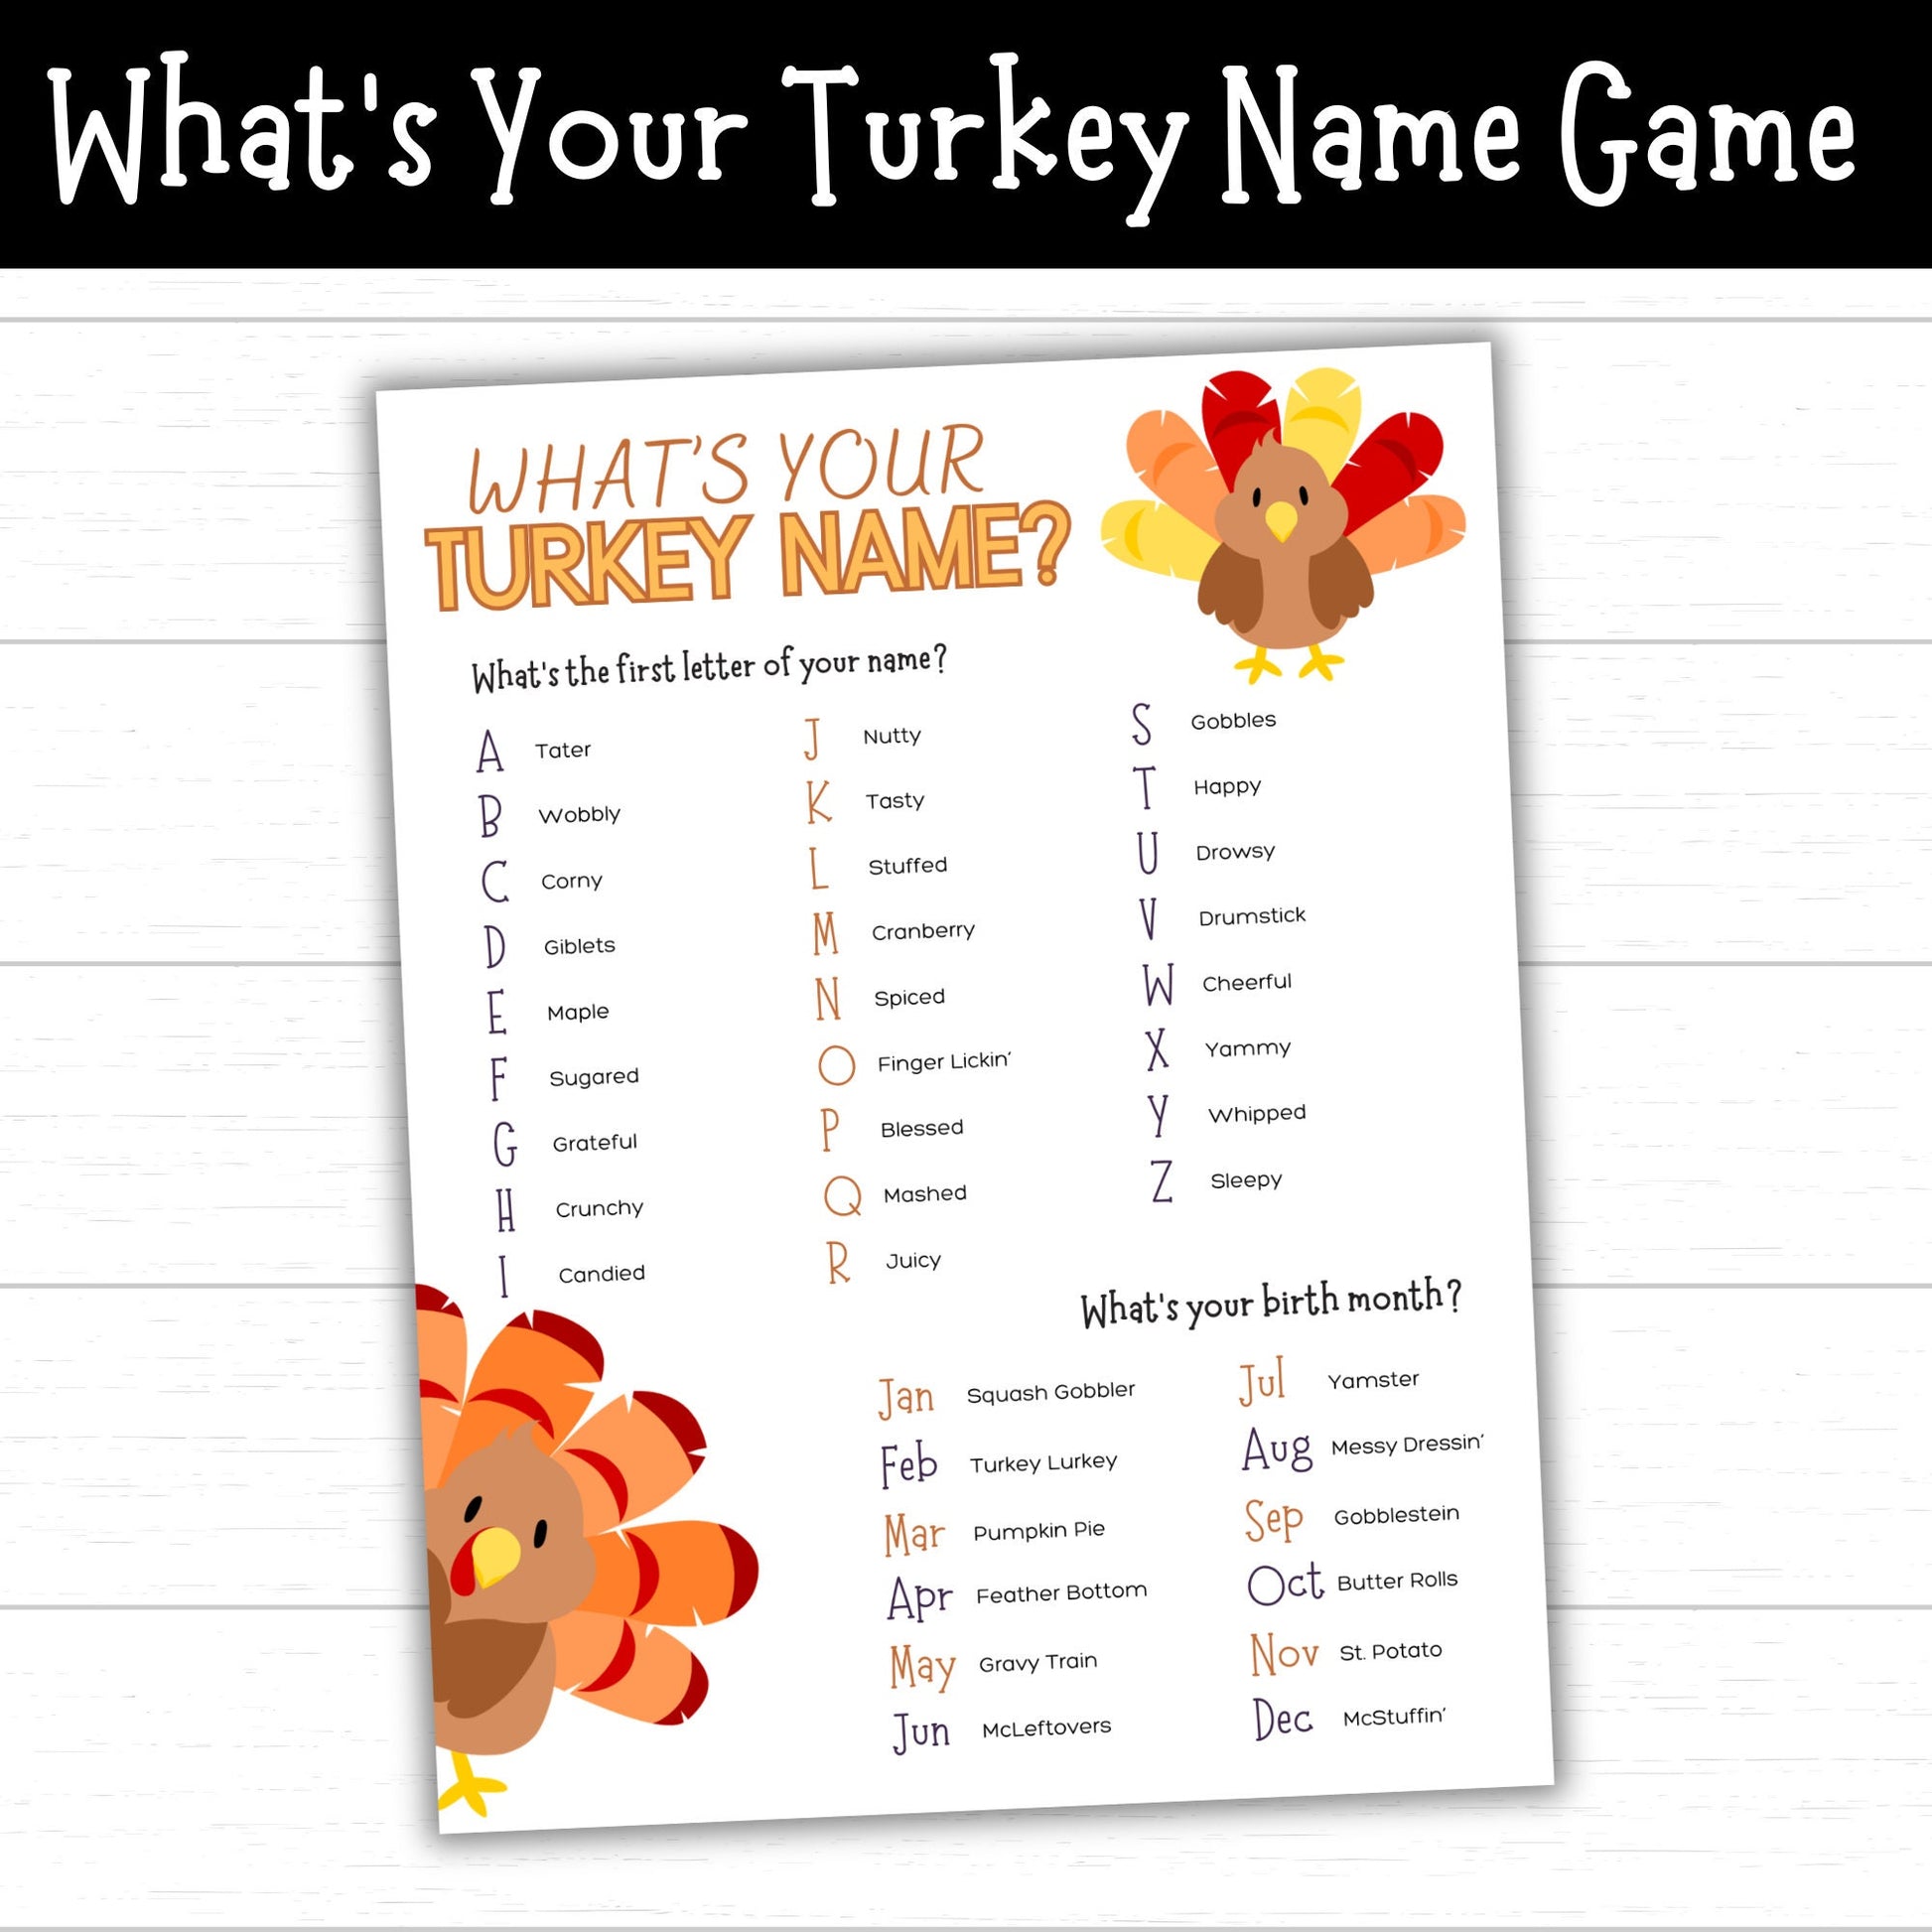 What's Your Turkey Name Game, Printable What's Your Turkey Name Game for Thanksgiving, Thanksgiving Printables, Printable Turkey Name Game